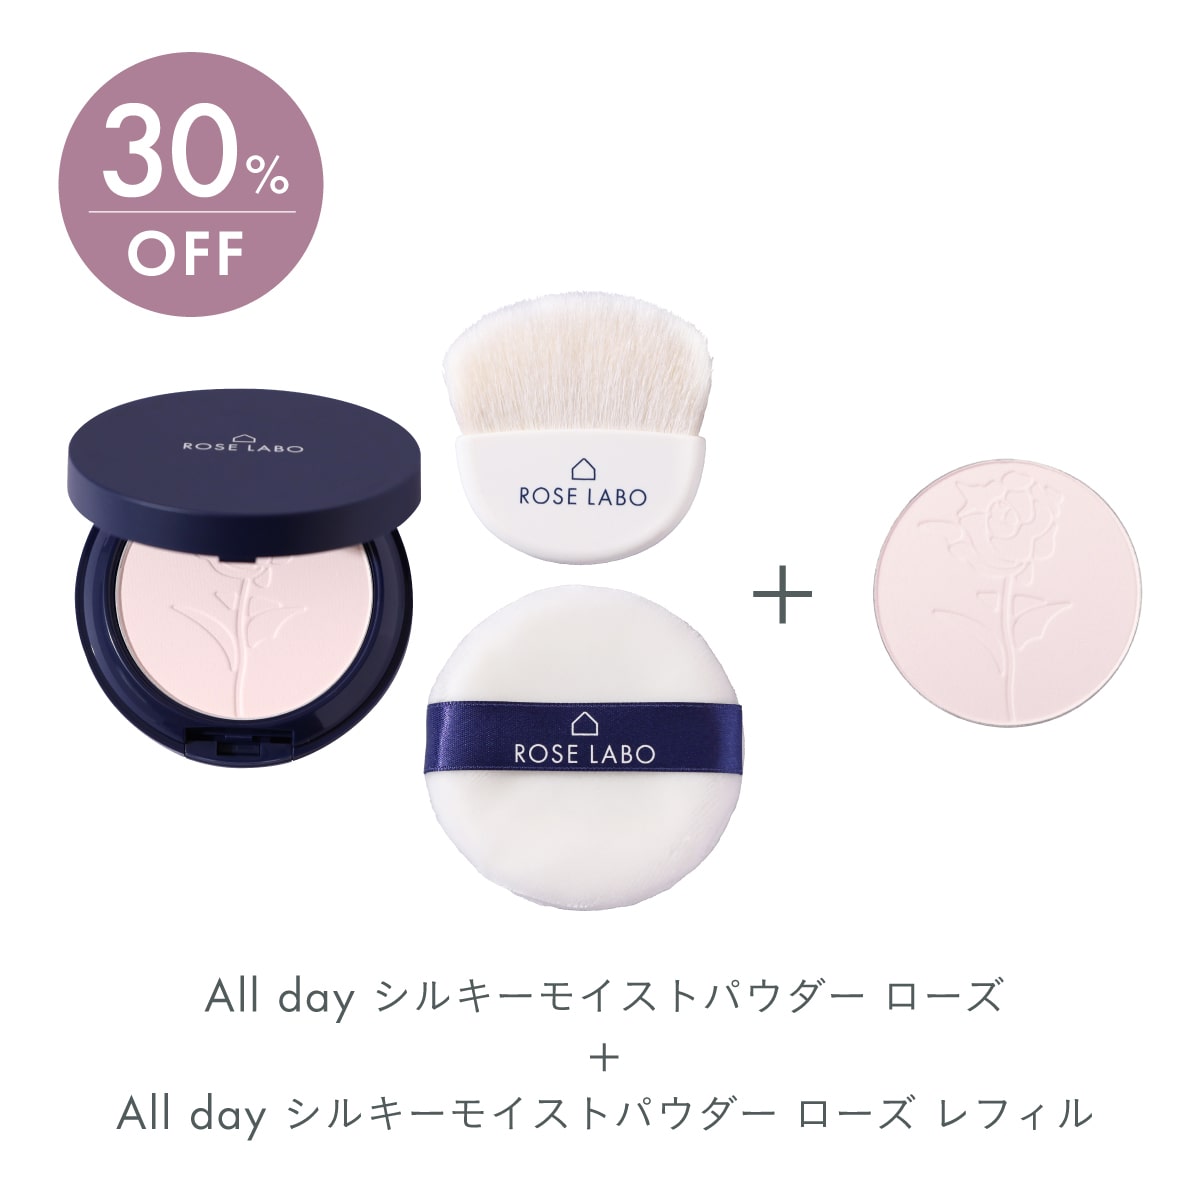 [30%OFF]All day シルキーモイストパウダー ローズ＋レフィルセット